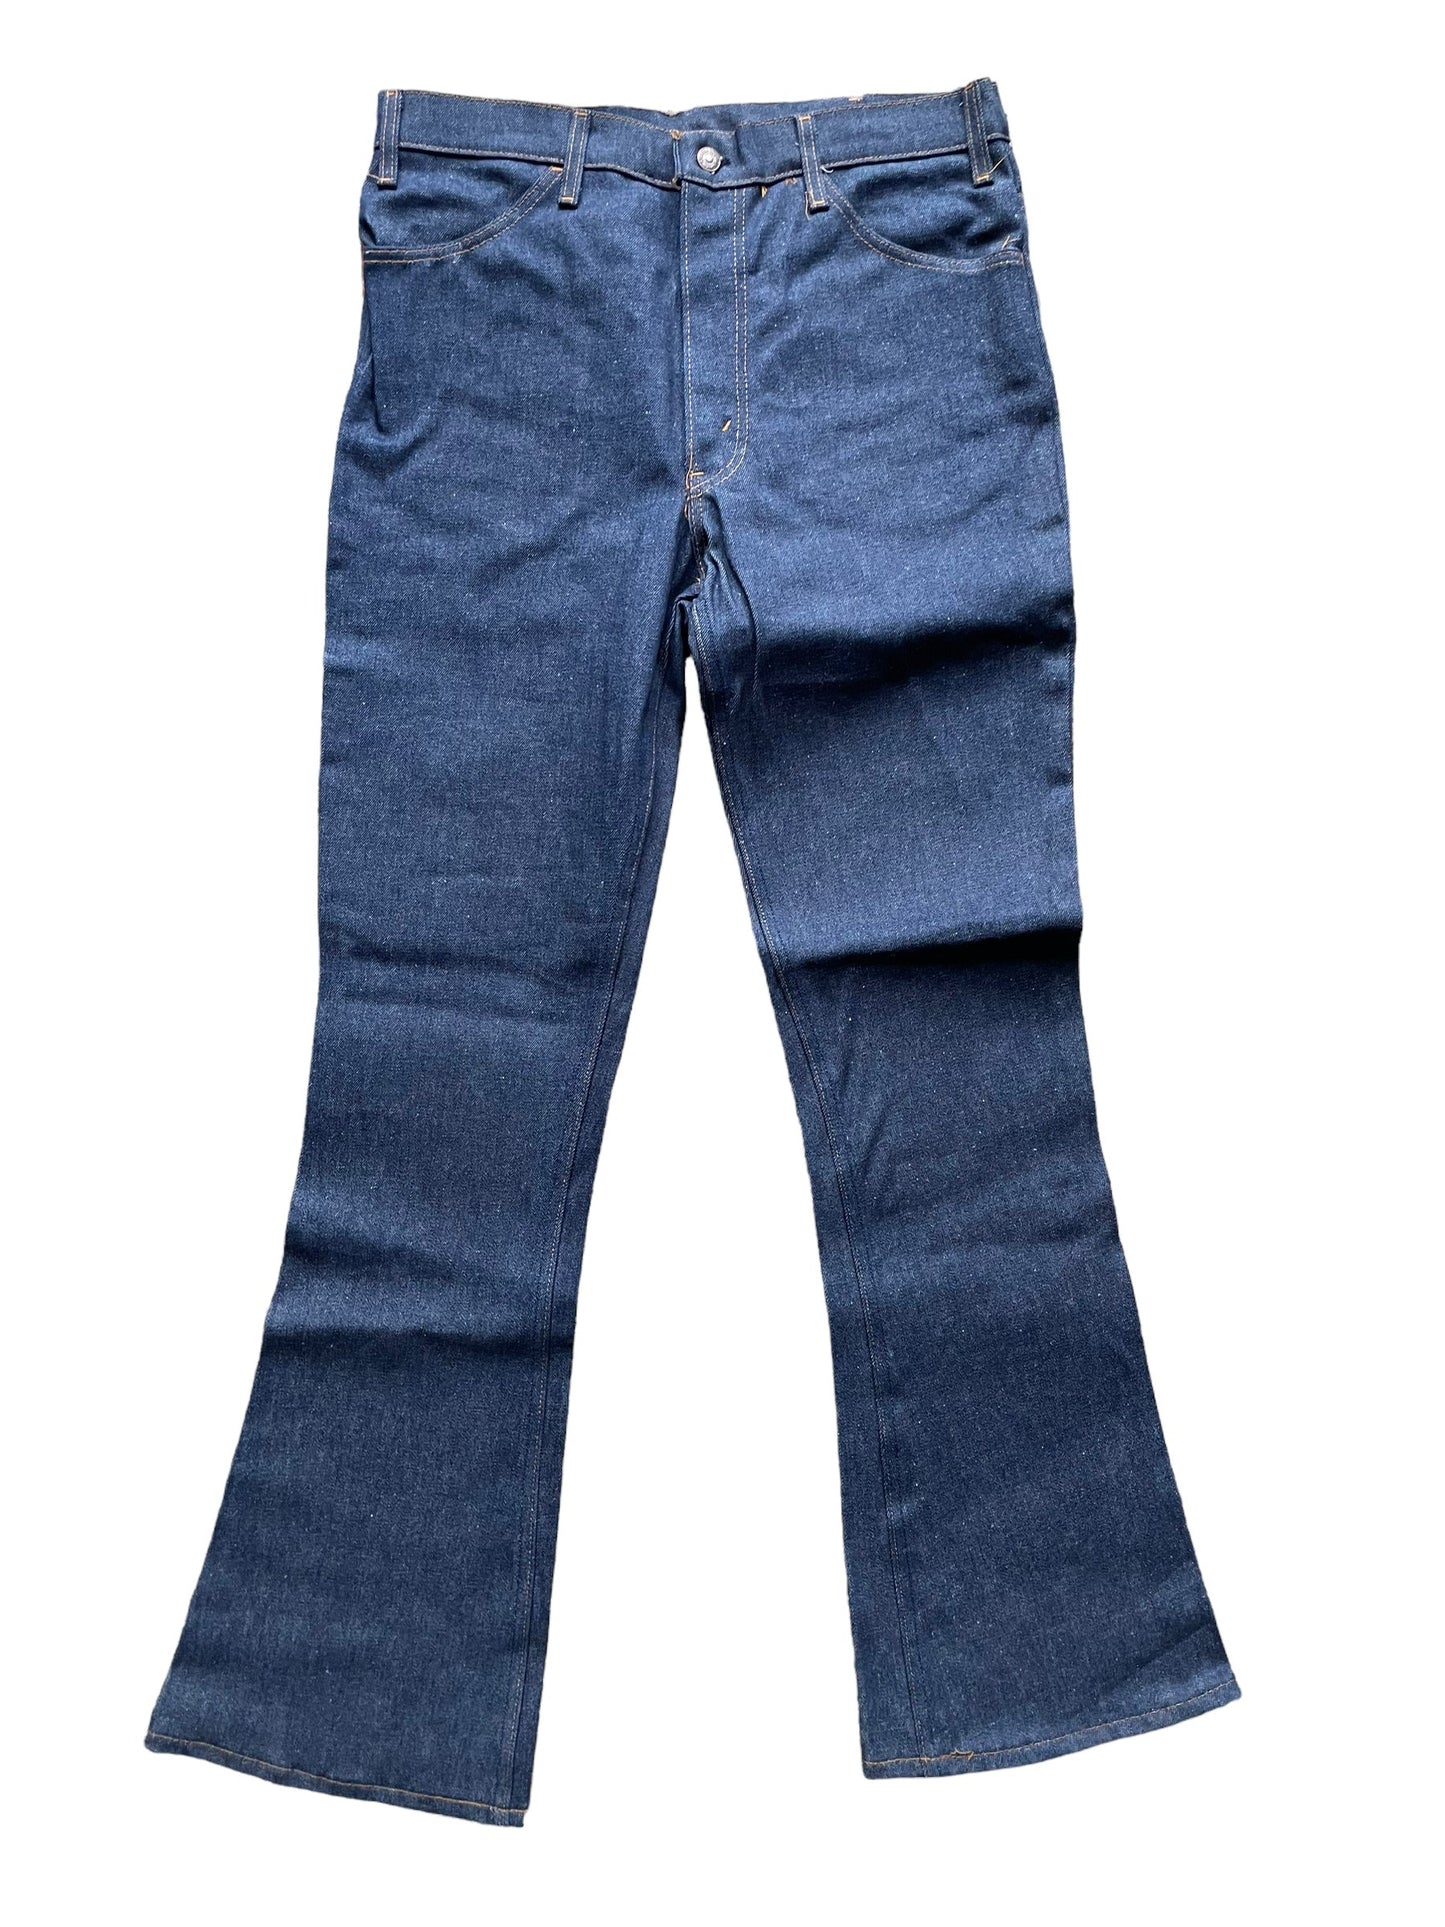 Full front view of Vintage 80s Levi's 646 Flares | Seattle Deadstock Levi's | Barn Owl Vintage